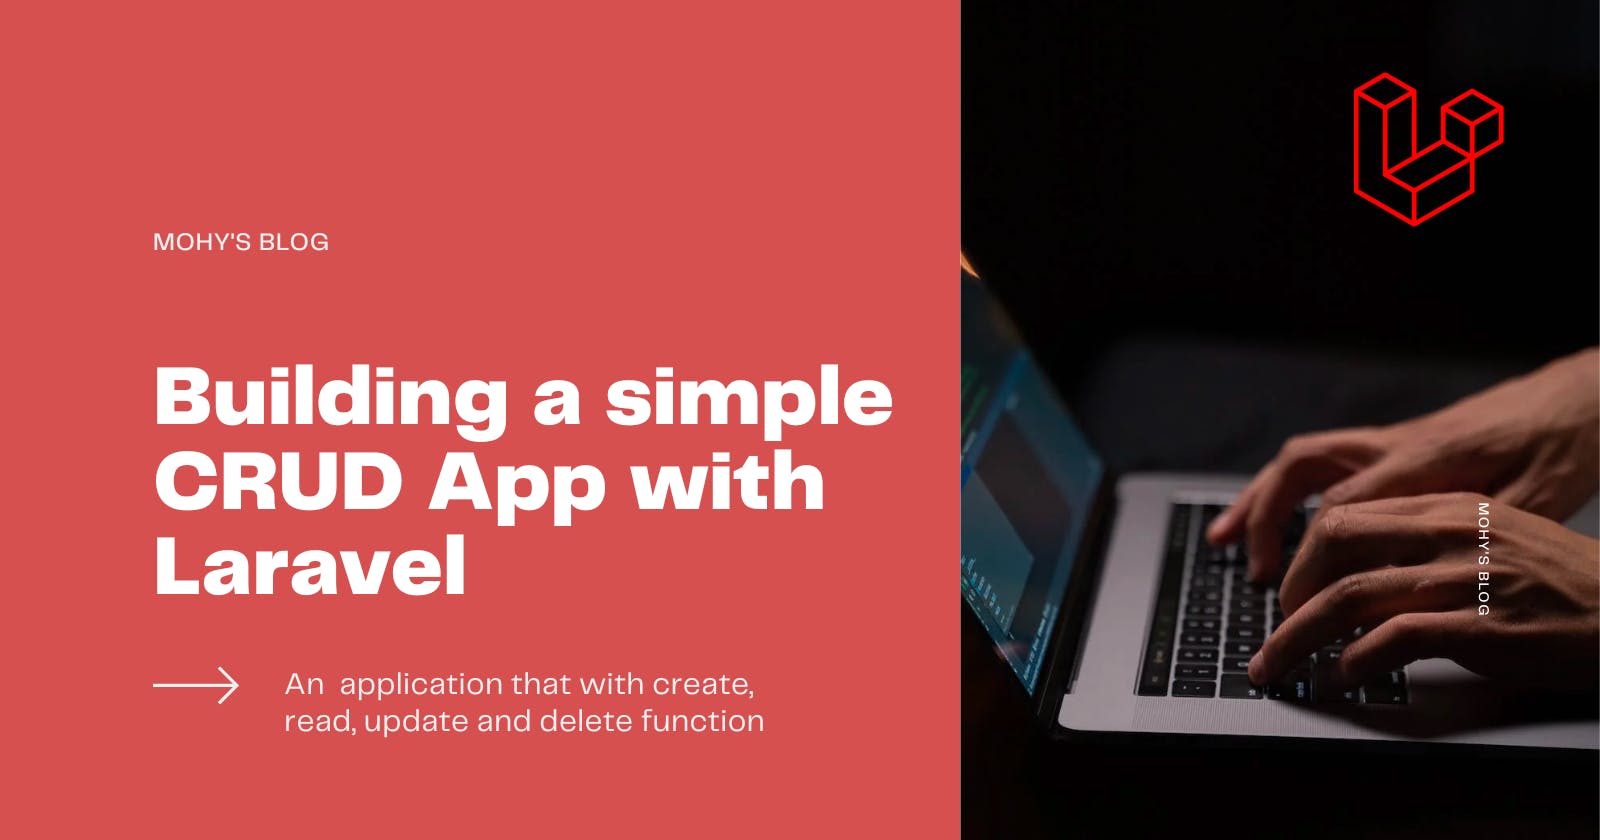 Building a simple CRUD (create, read, update, delete) application with Laravel